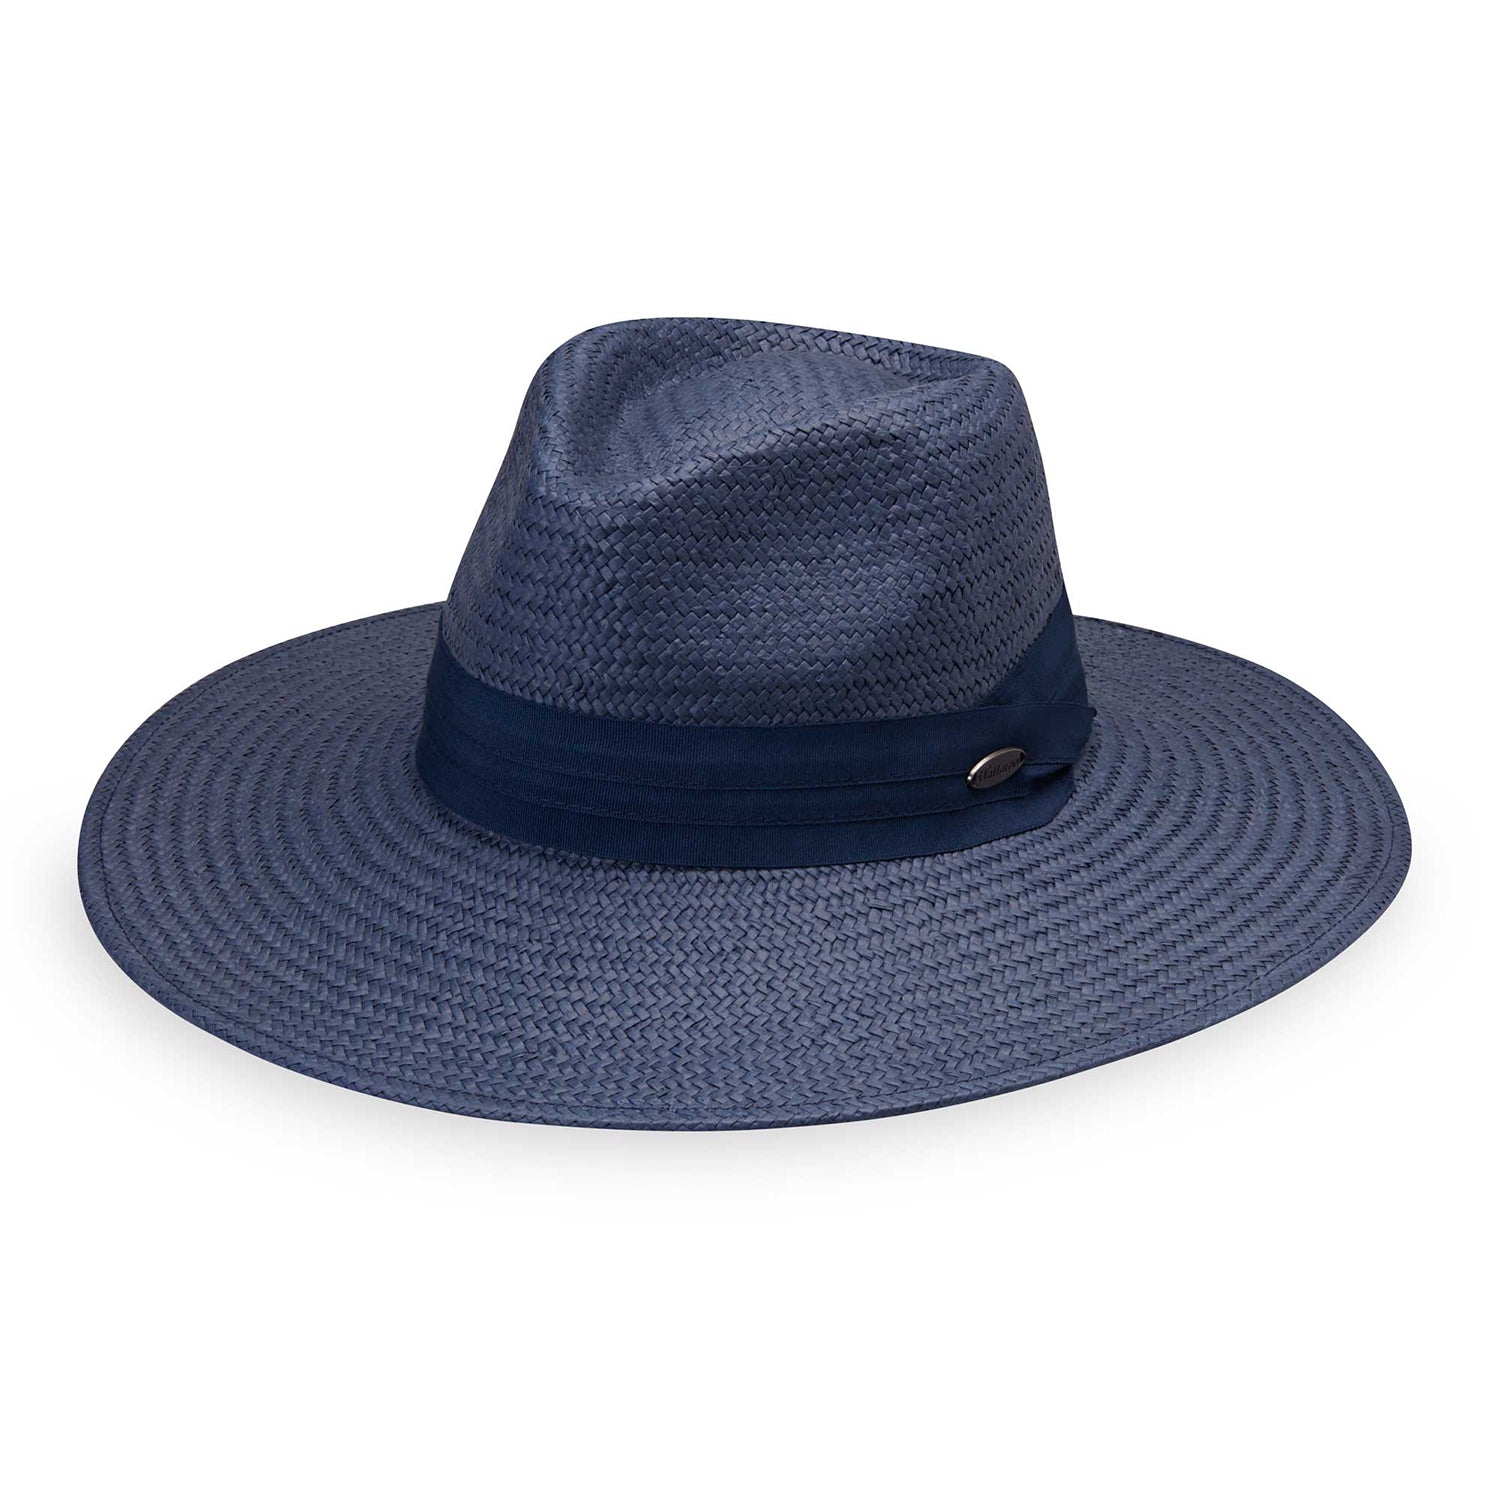 Featuring Fedora style Klara straw sun hat by Wallaroo with a big wide brim and UPF 50+ rating